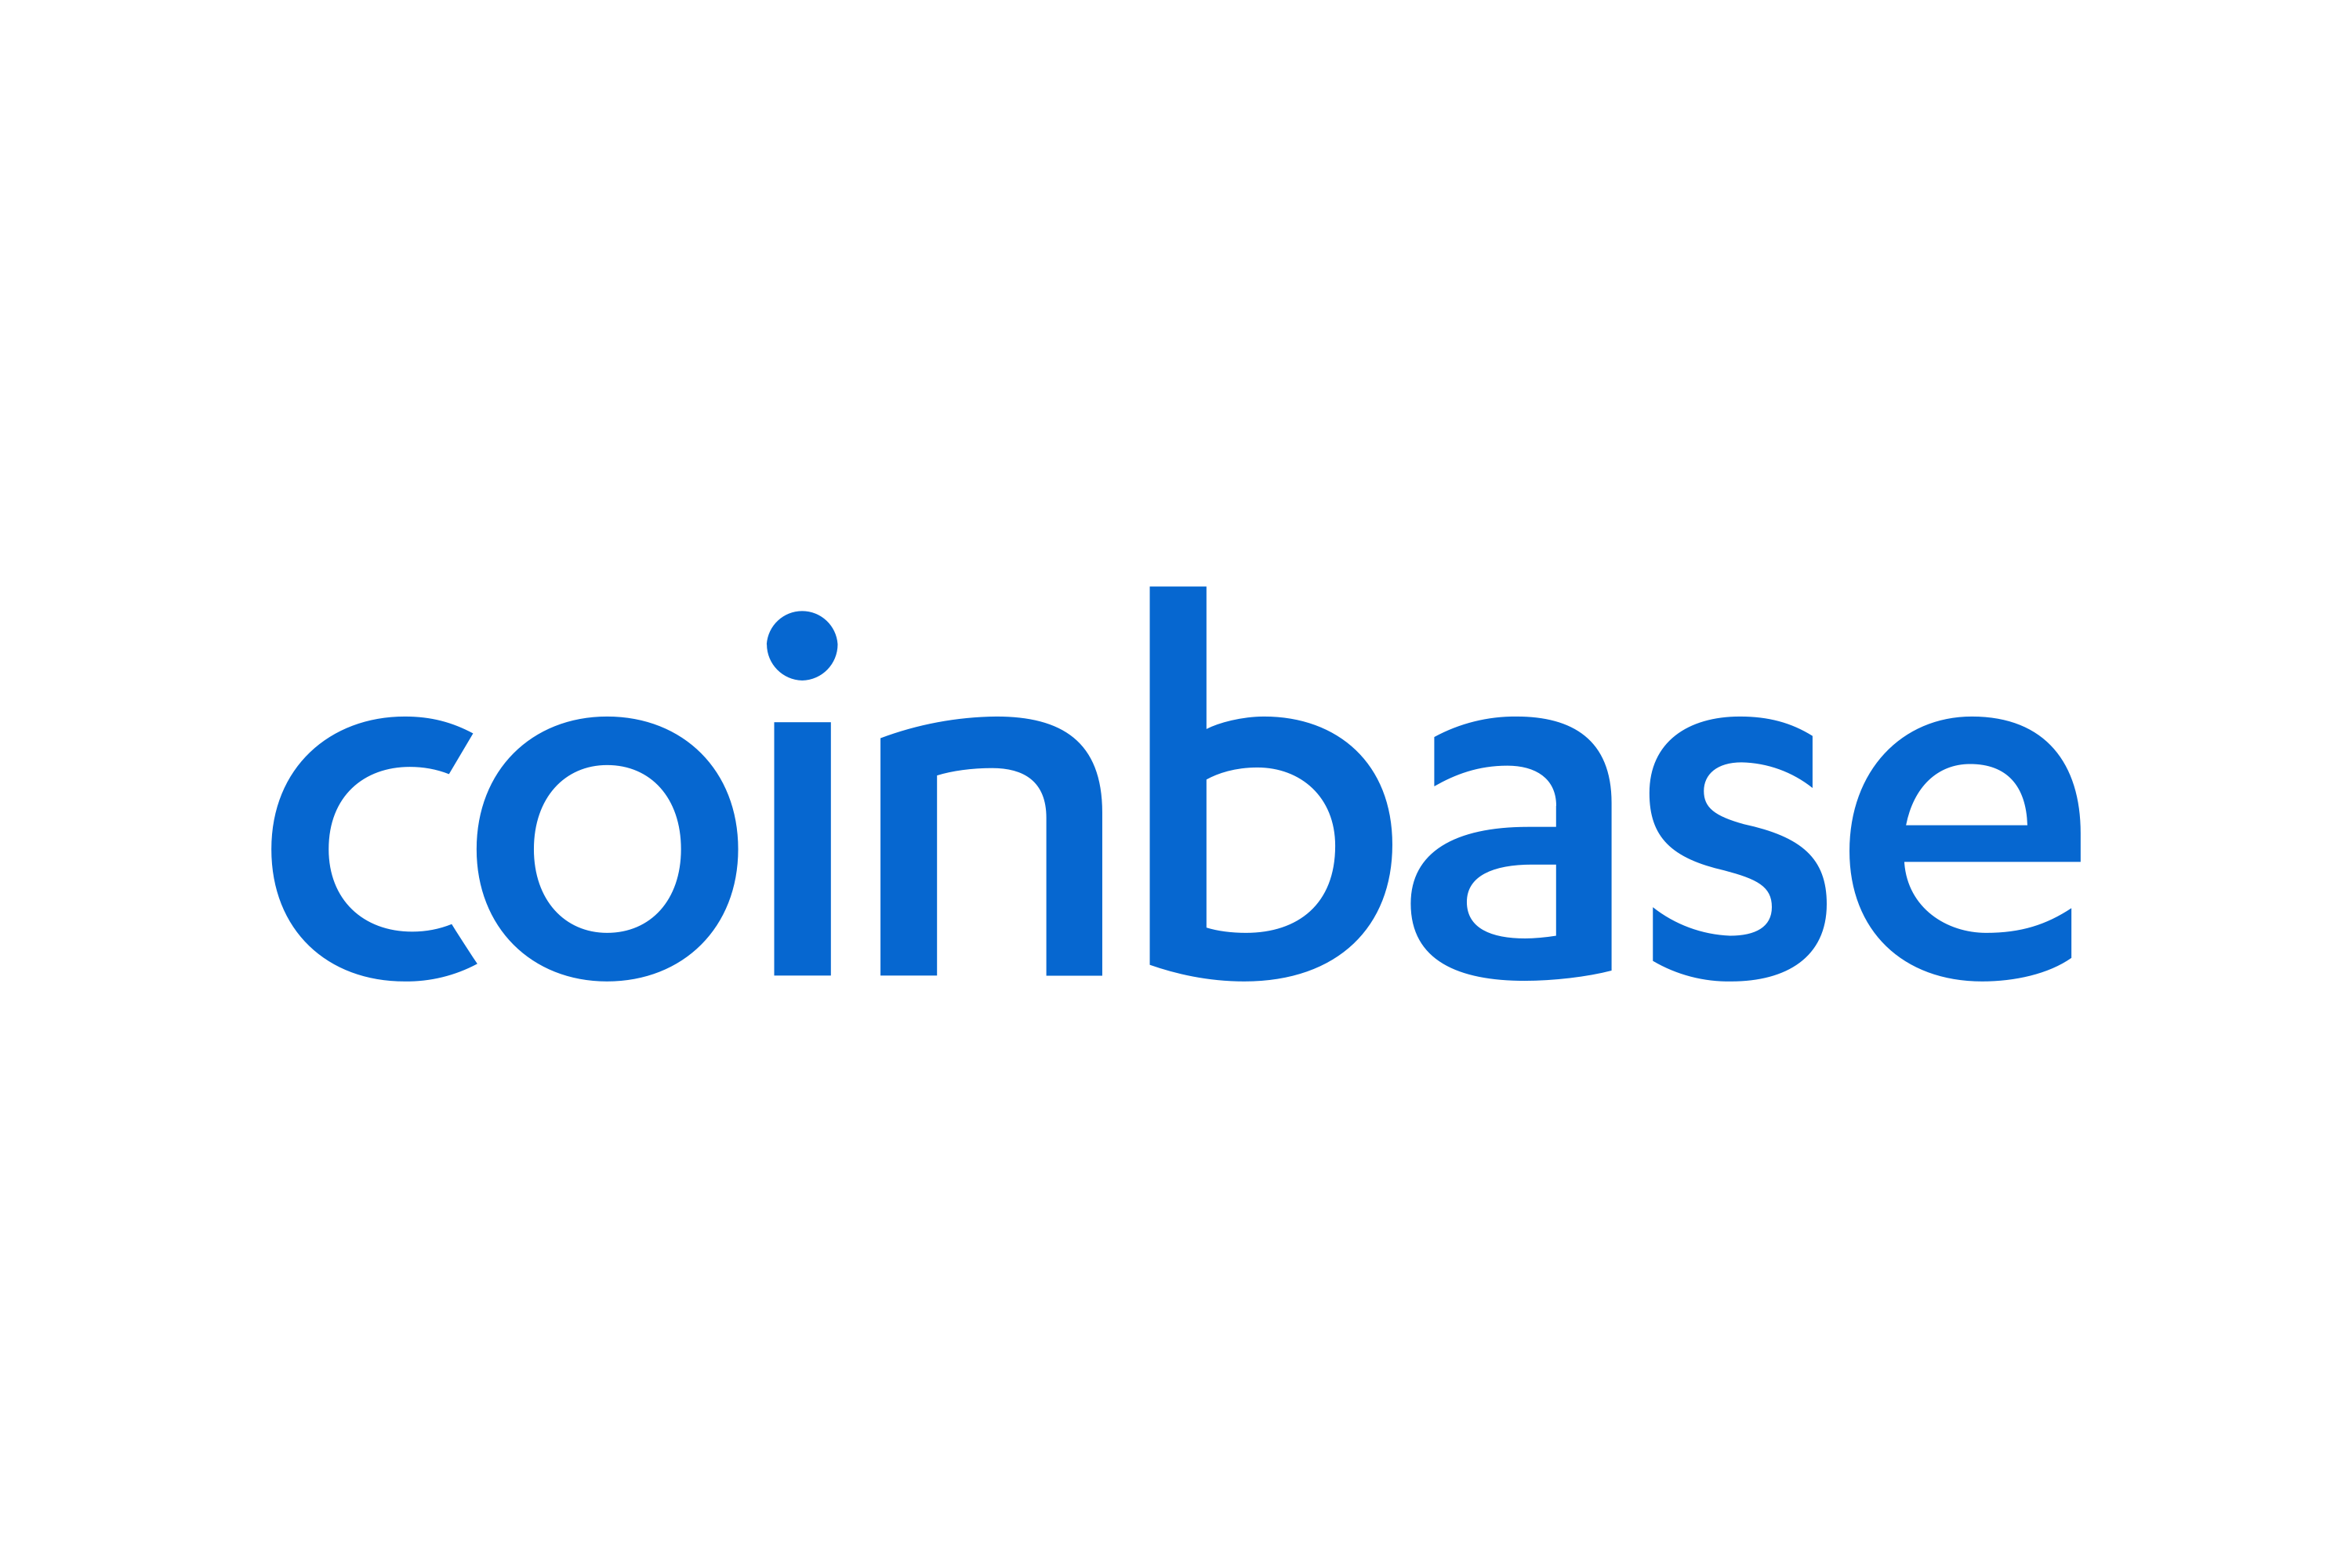 Download Coinbase Logo in SVG Vector or PNG File Format ...